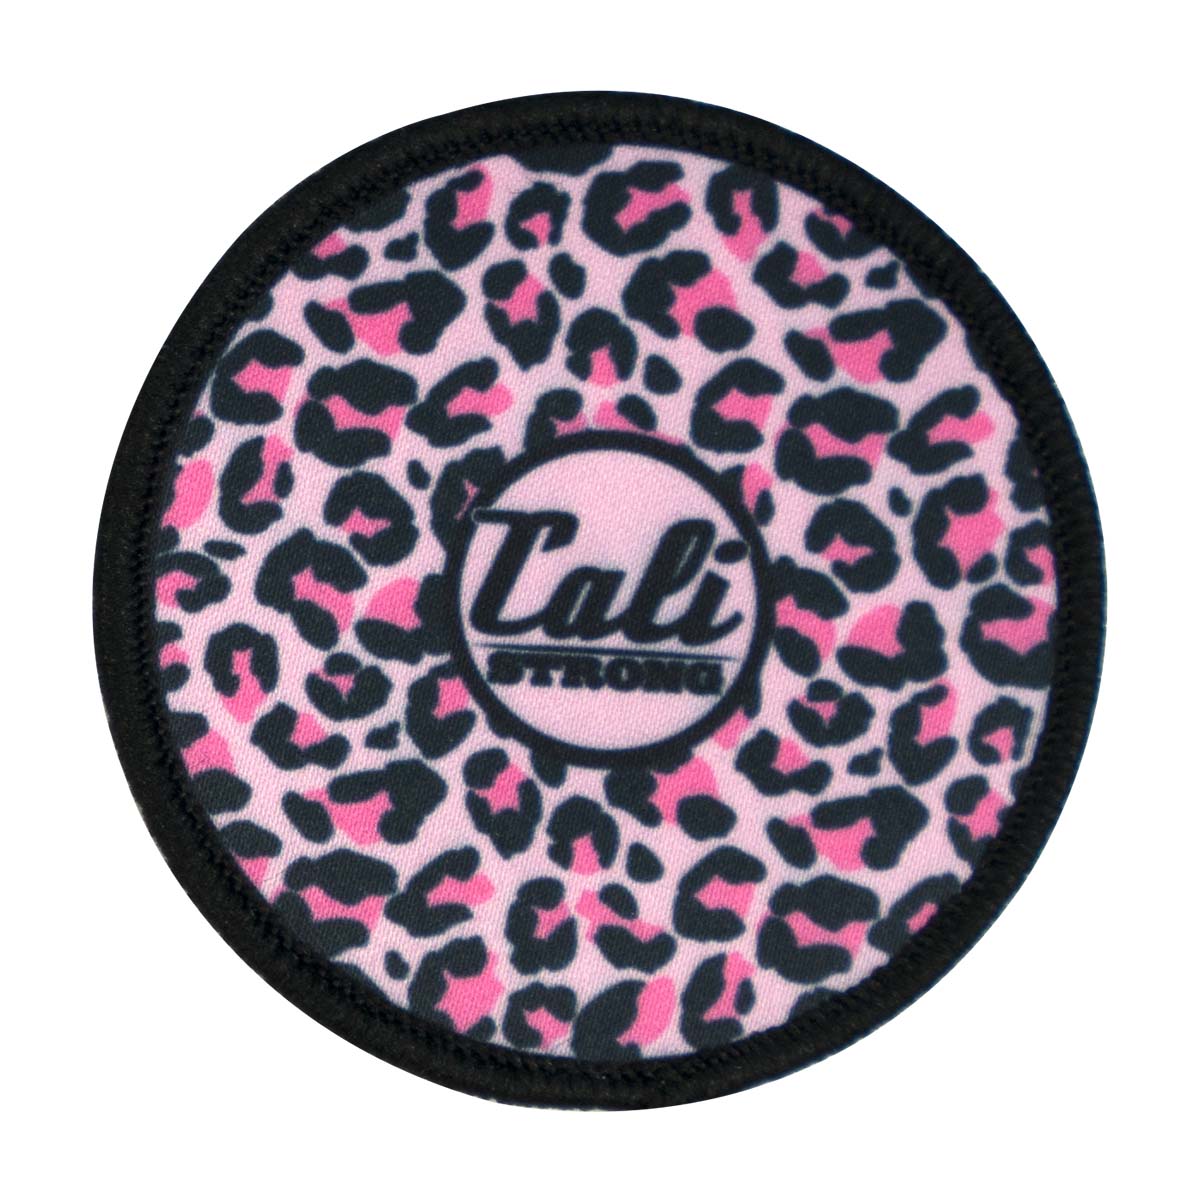 CALI Strong Pink Cheeta Round Sublimated Hook-and-Loop Morale Patch - Patches - Image 1 - CALI Strong